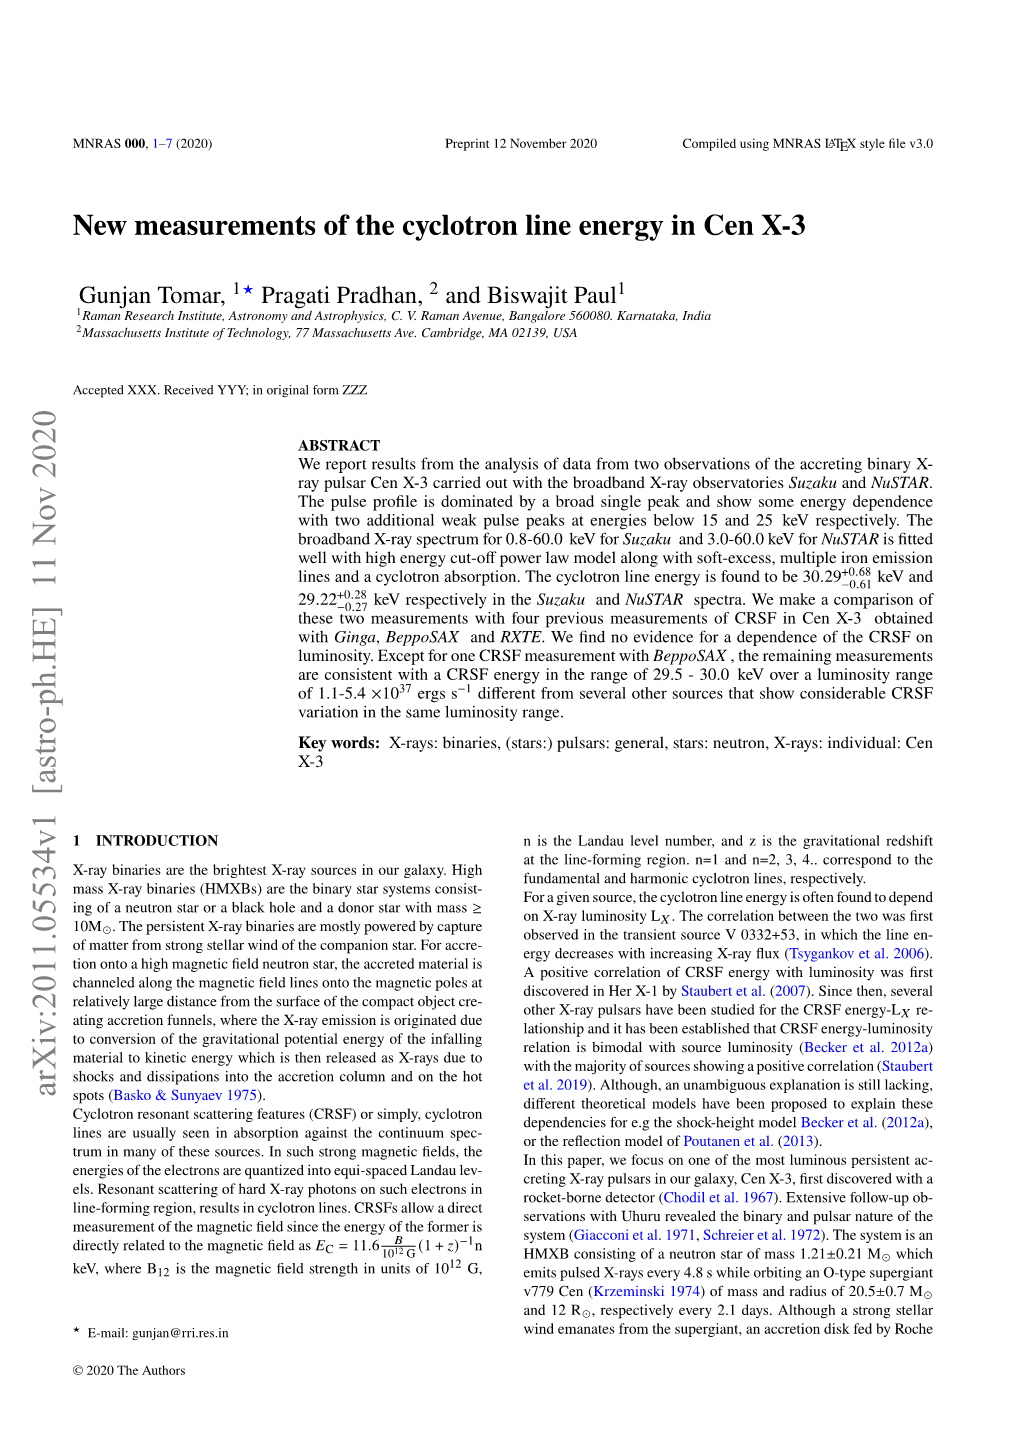 New Measurements of the Cyclotron Line Energy in Cen X-3